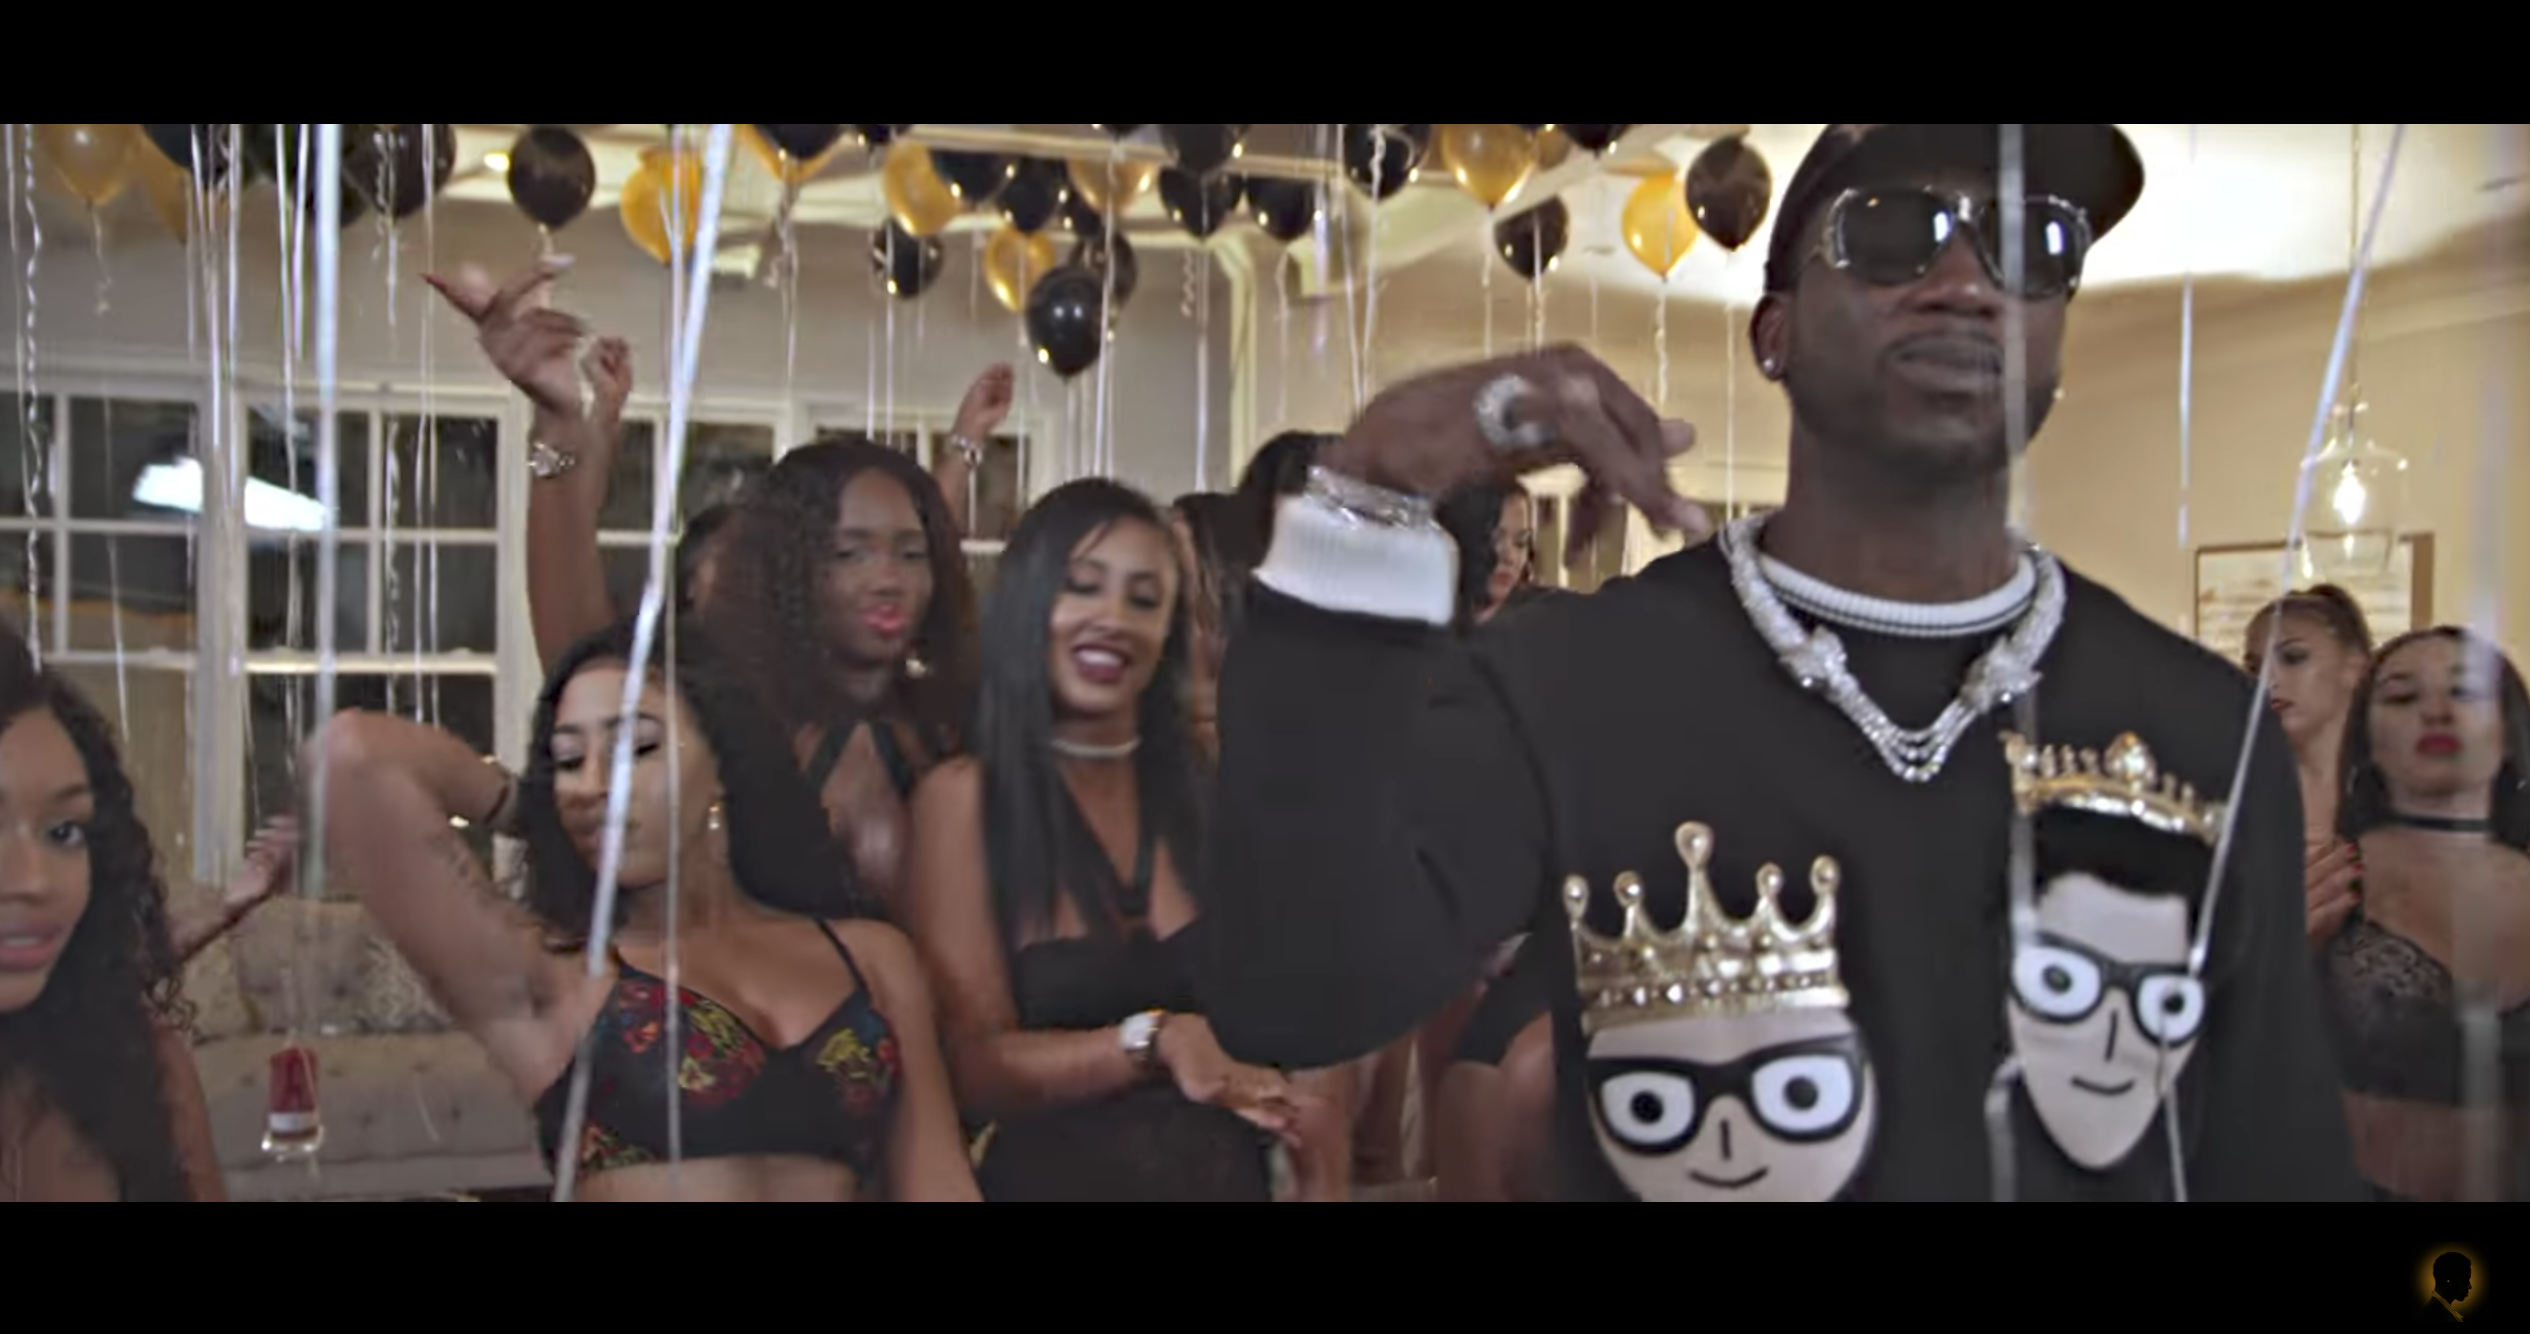 Get The Look: Gucci Mane Ft Offset 'Met Gala' Music Video – PAUSE Online |  Men's Fashion, Street Style, Fashion News & Streetwear